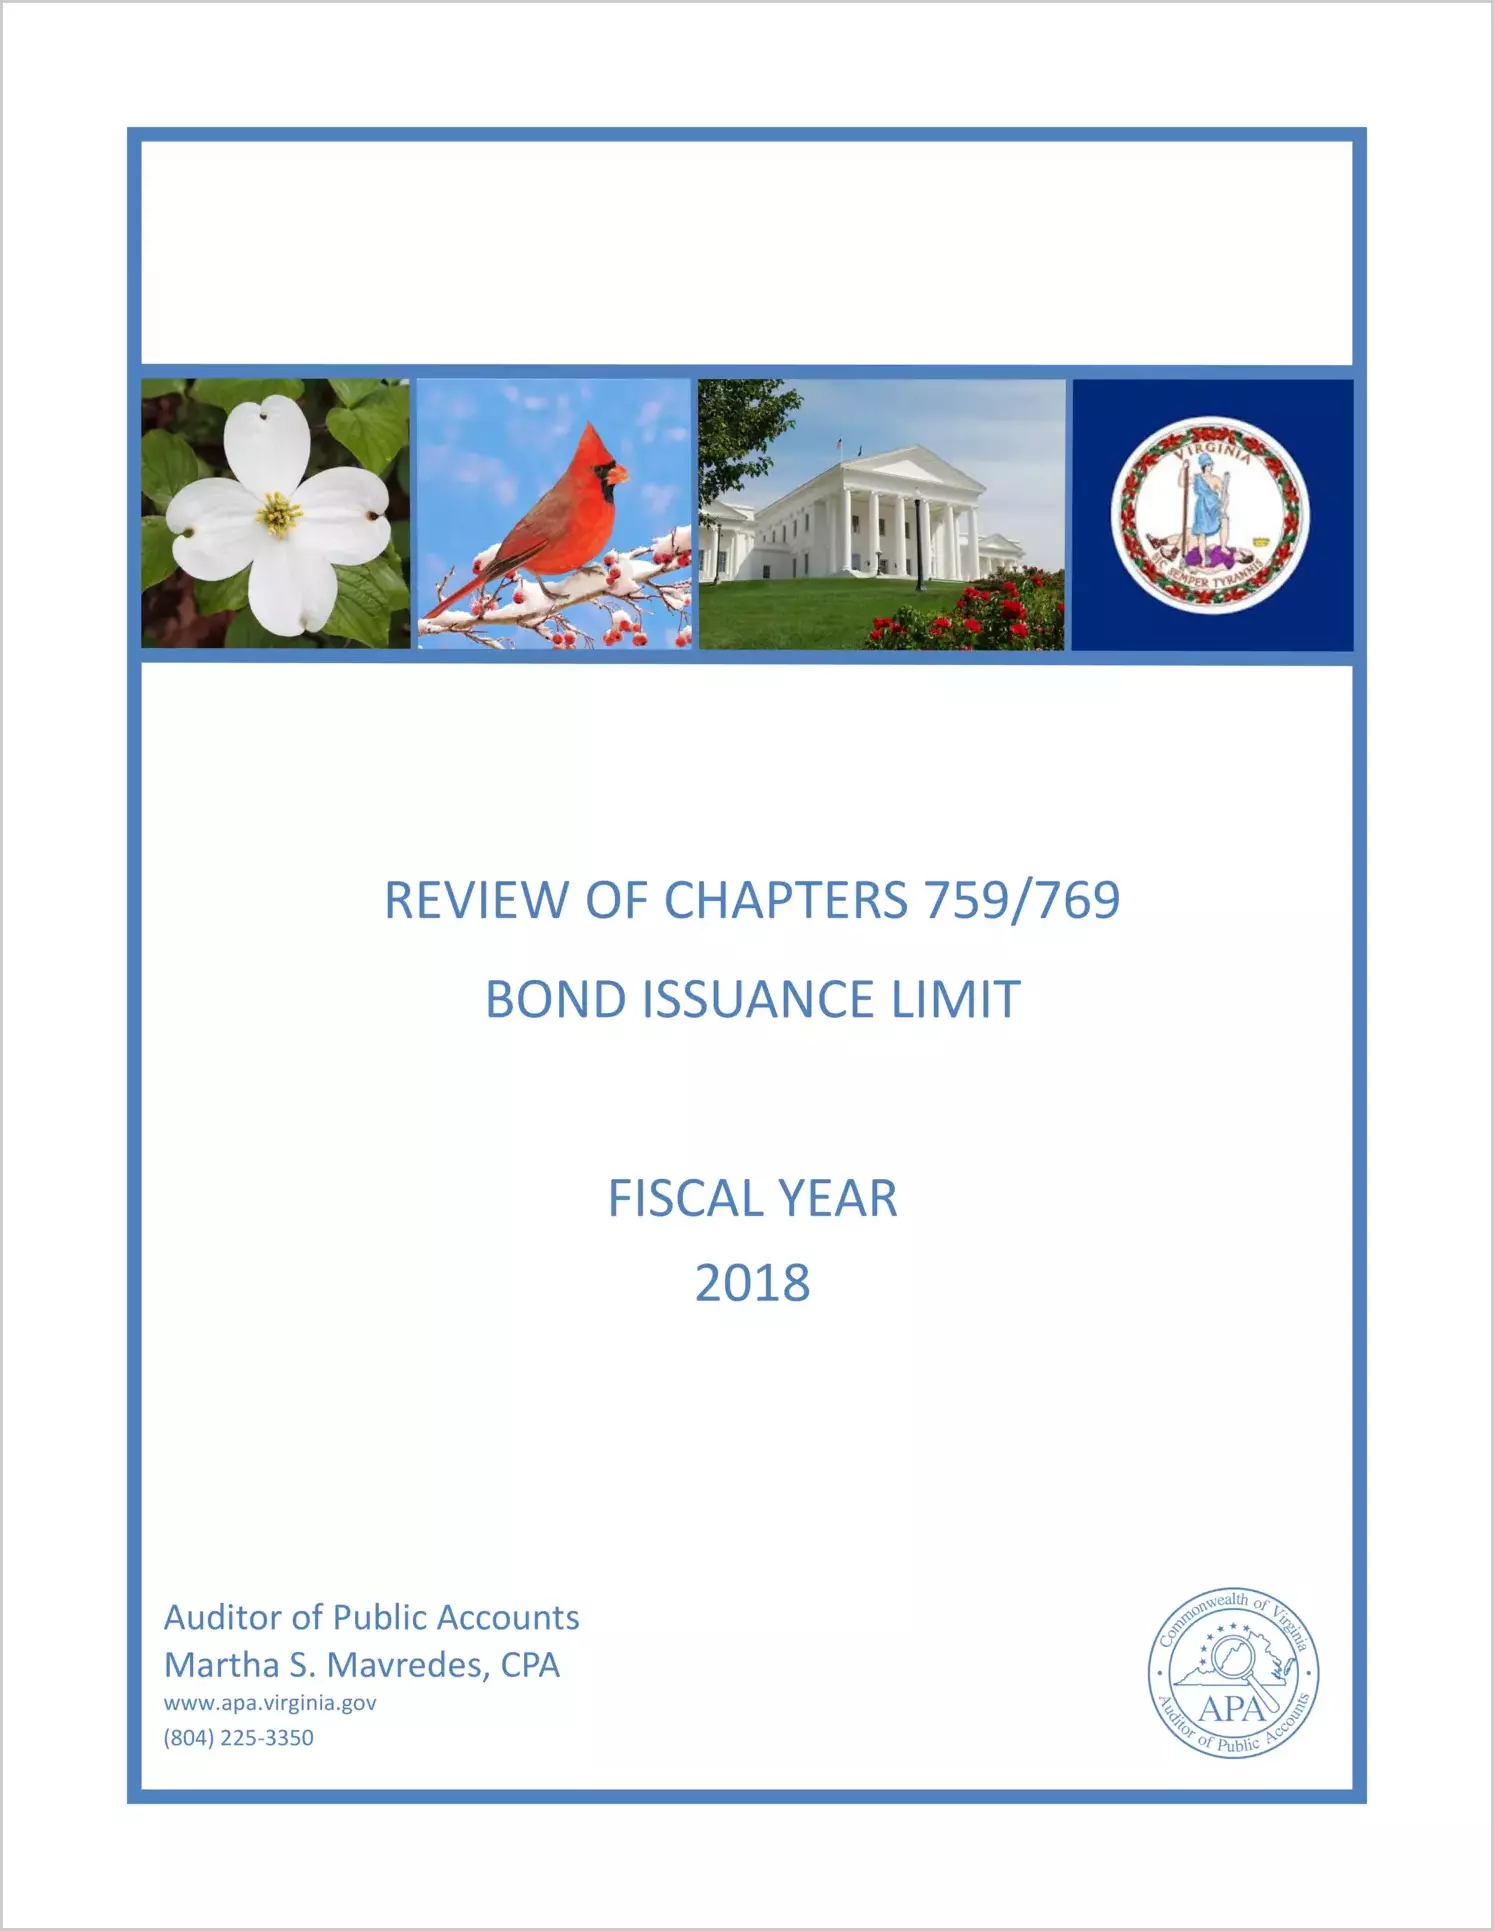 Review of Chapters 759/769 Bond Issuance Limit Fiscal Year 2018